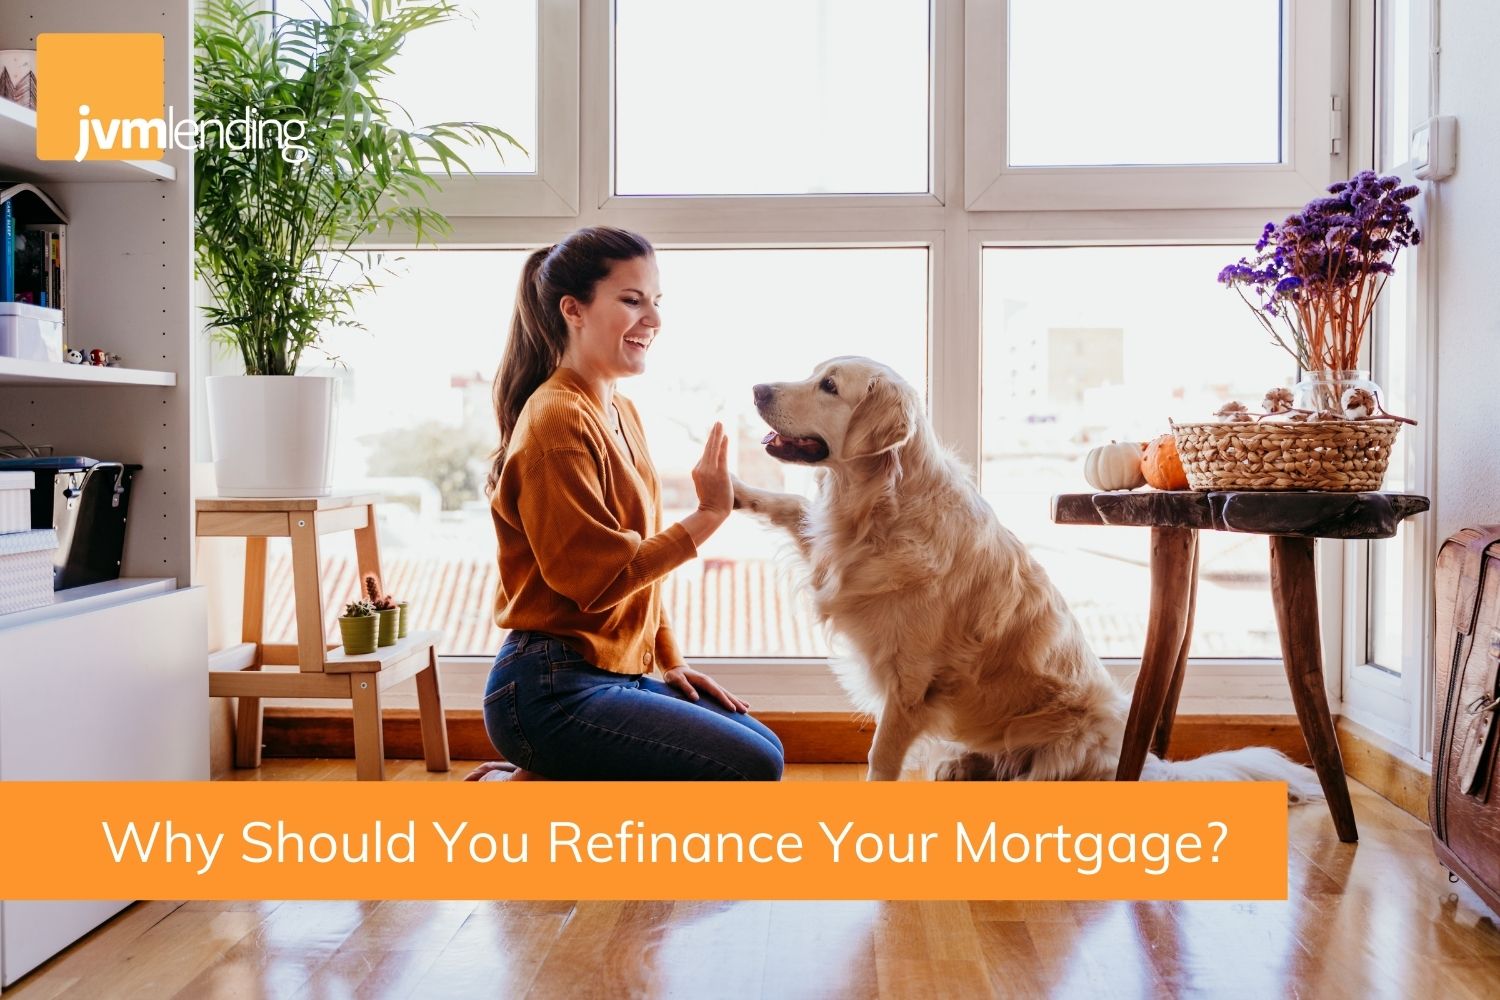 A happy woman high fives with her Golden Retriever dog because she just found out she should and can refinance her mortgage.